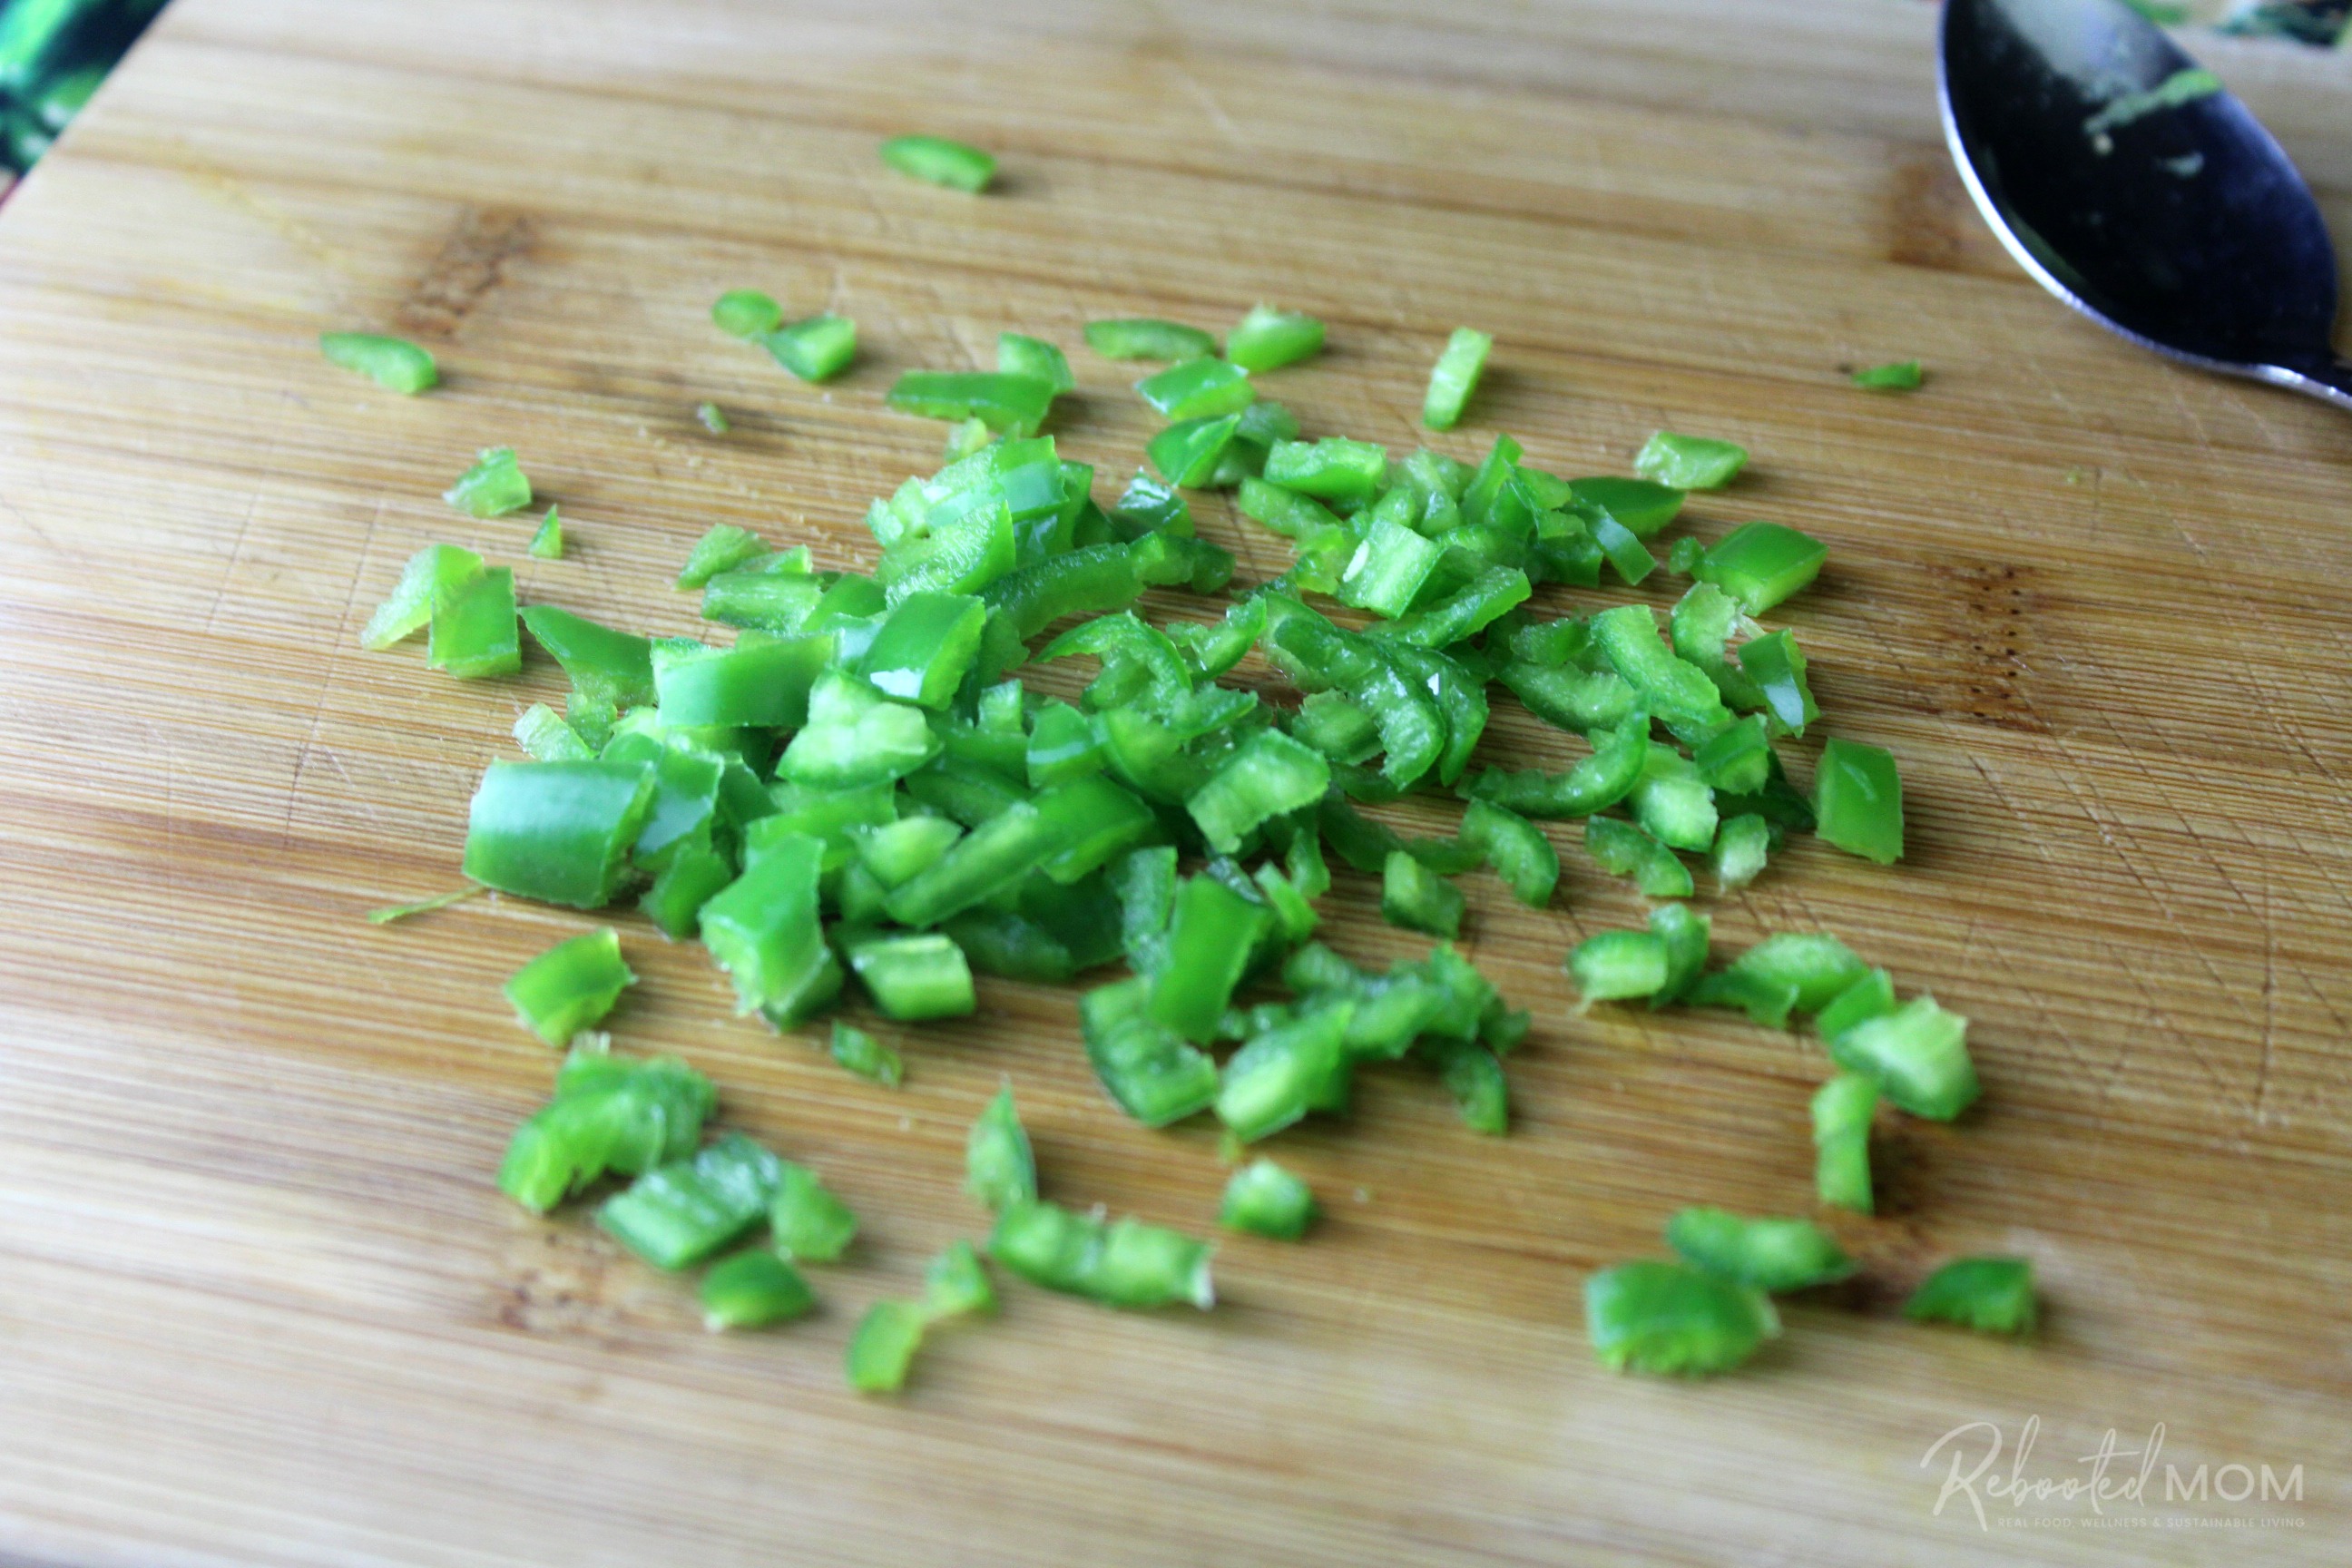 Diced serrano peppers